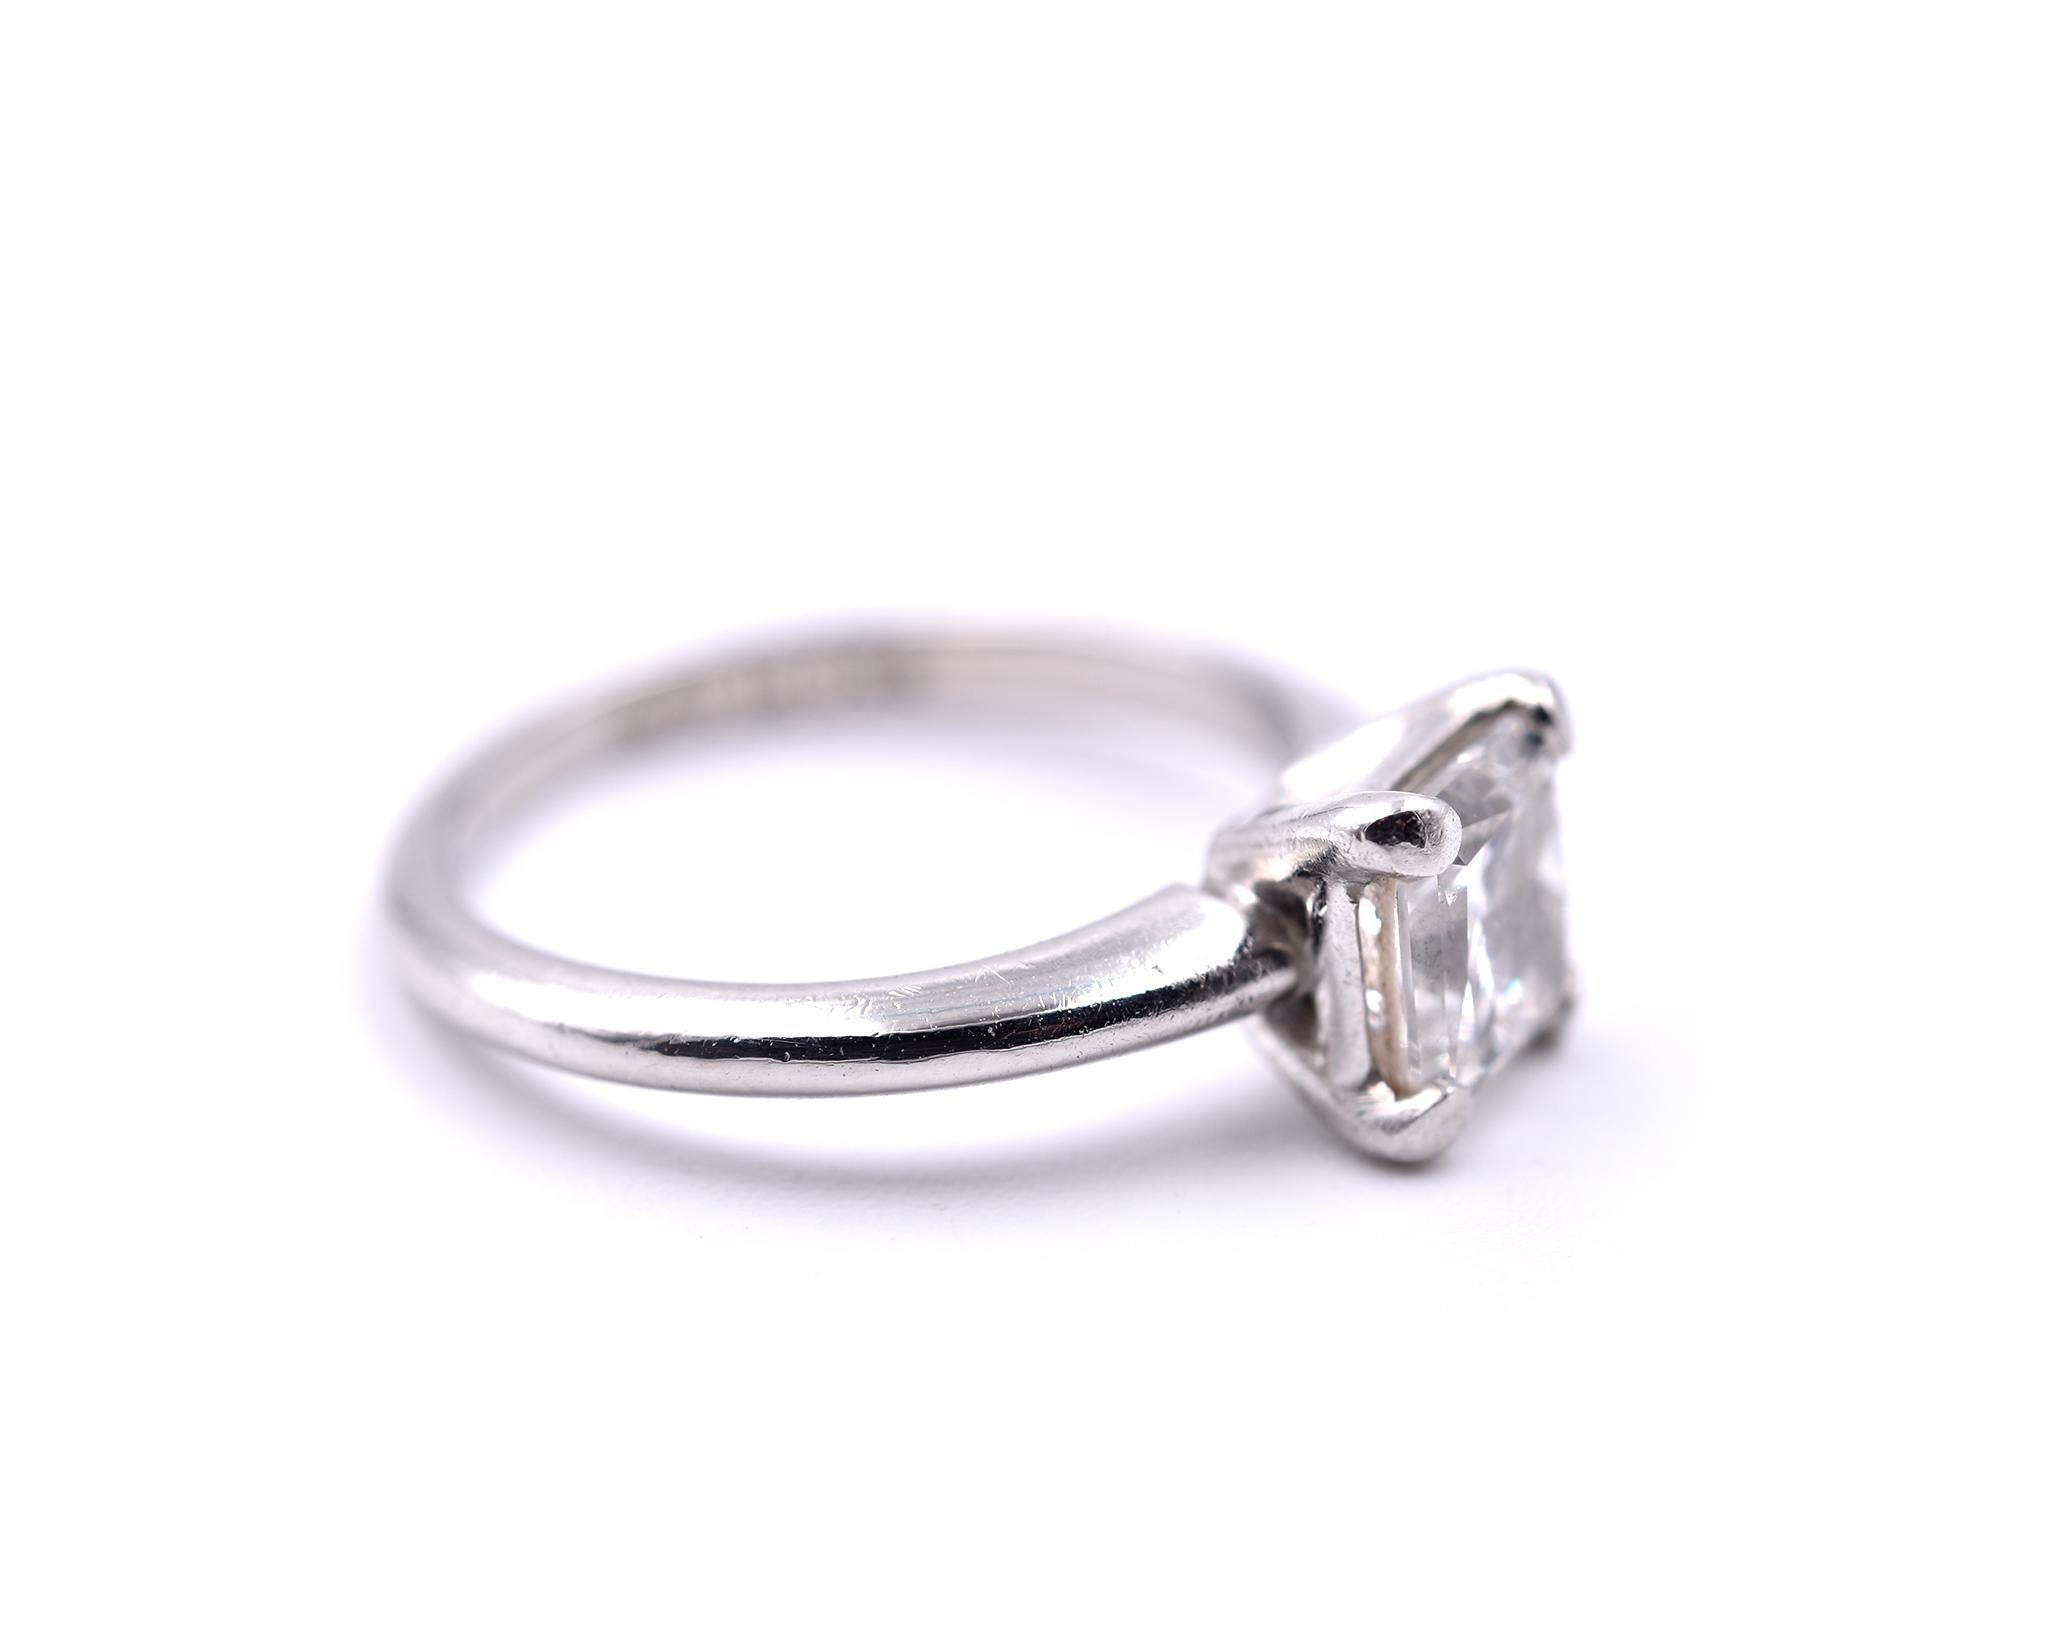 Designer: custom design
Material: Platinum 
Center Diamond: 1 princes cut= 1.00ct GIA 15167077
Color: G
Clarity: VVS1
Ring size: 3 ¼ (please allow two additional shipping days for sizing requests) 
Dimensions: ring is approximately 6.41mm by